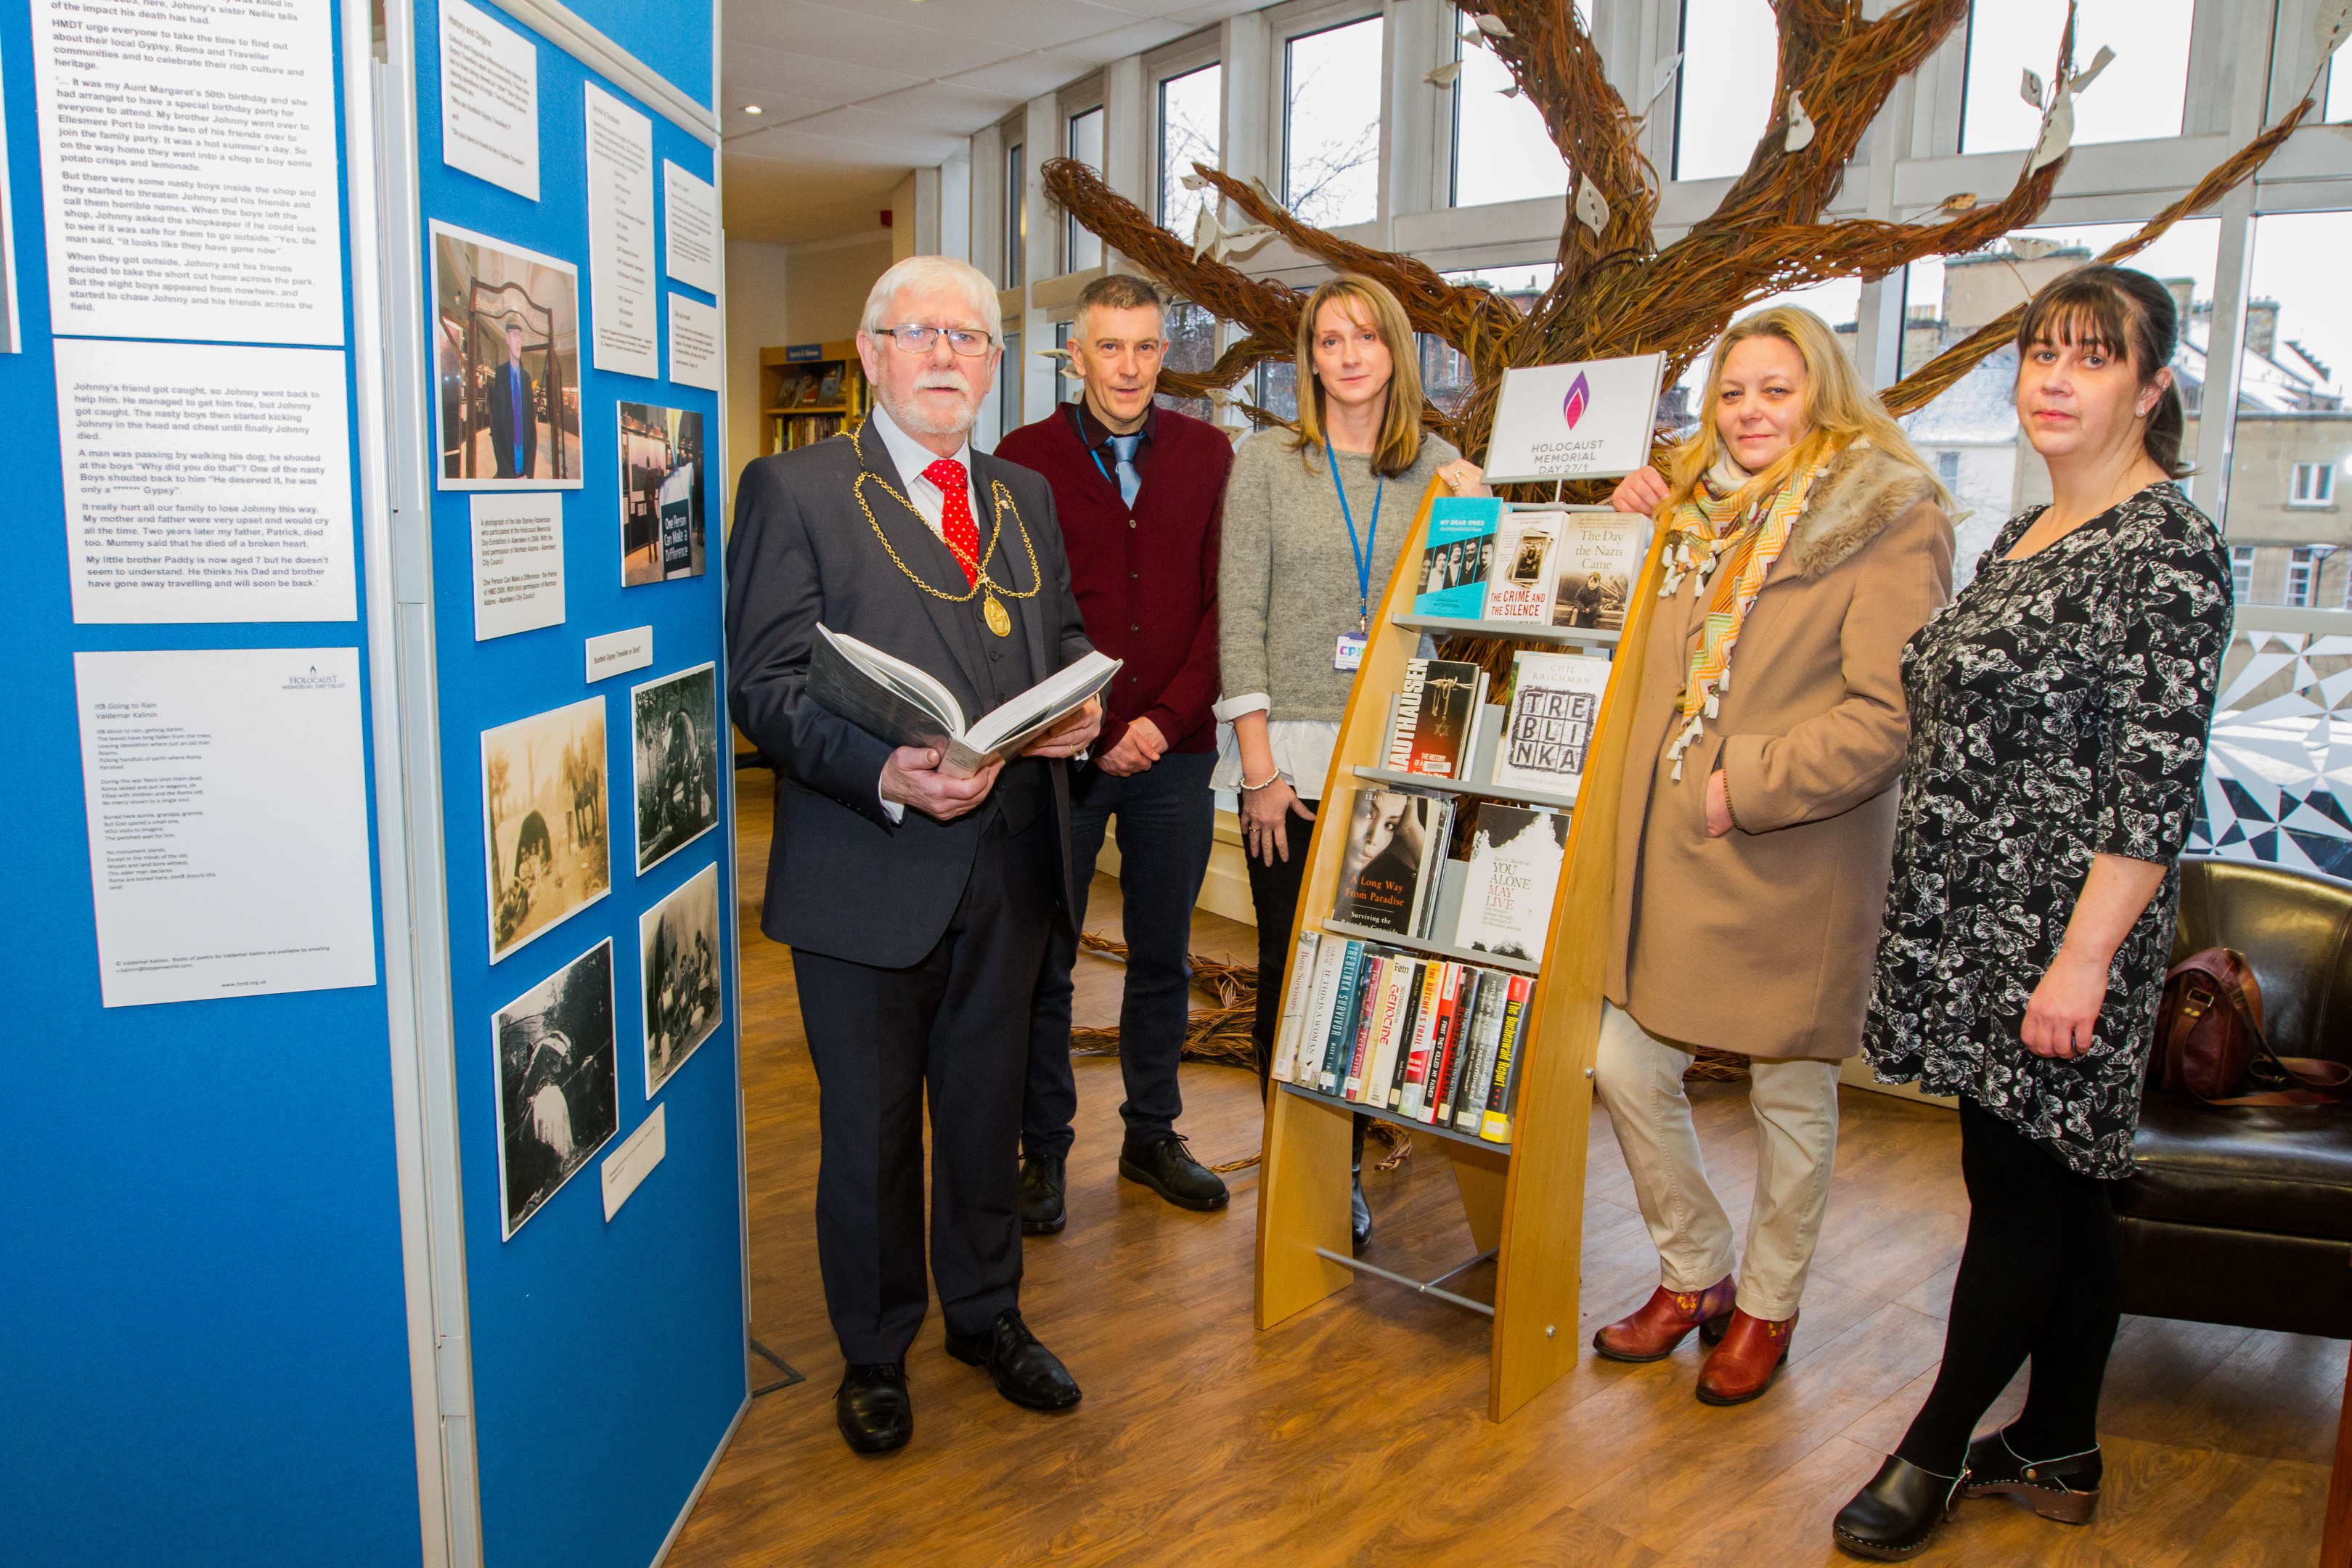 Picture shows, left to right, Provost Dennis Melloy, David McPhee (Perth & Kinross Council), Dr Nicola Cowmeadow (Local History Officer, AK Bell Library), Roseanna McPhee (Chairperson of Rajpot) and Elaine Blair (AK Bell Library, Librarian).